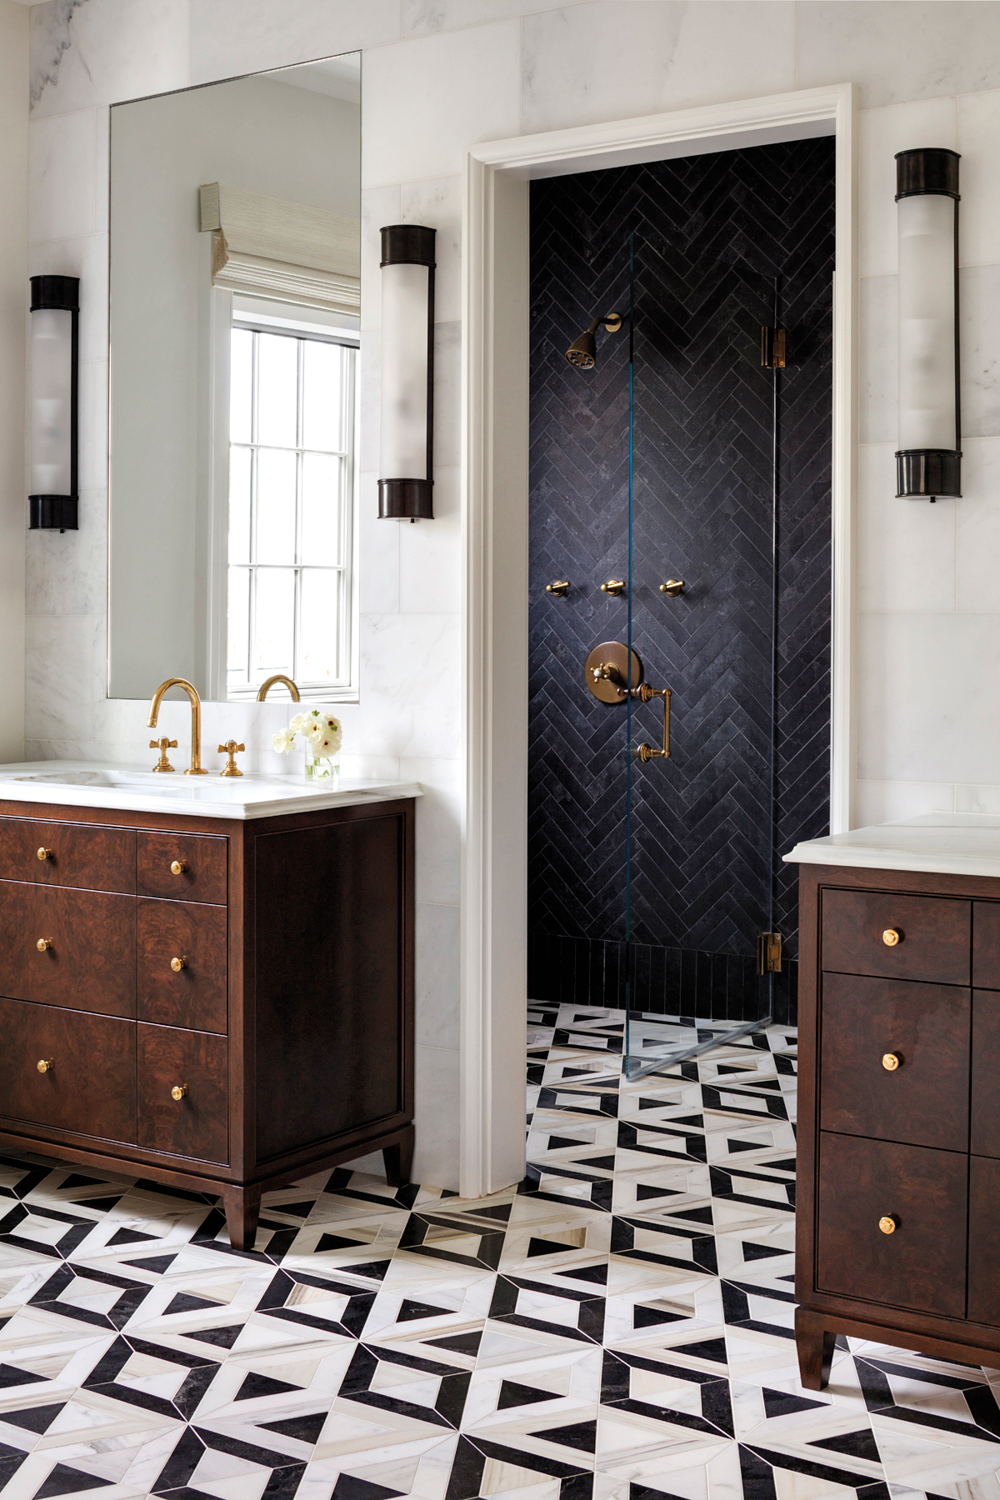 Wet room with brown furnishings and sleek tiles by Erica Burns